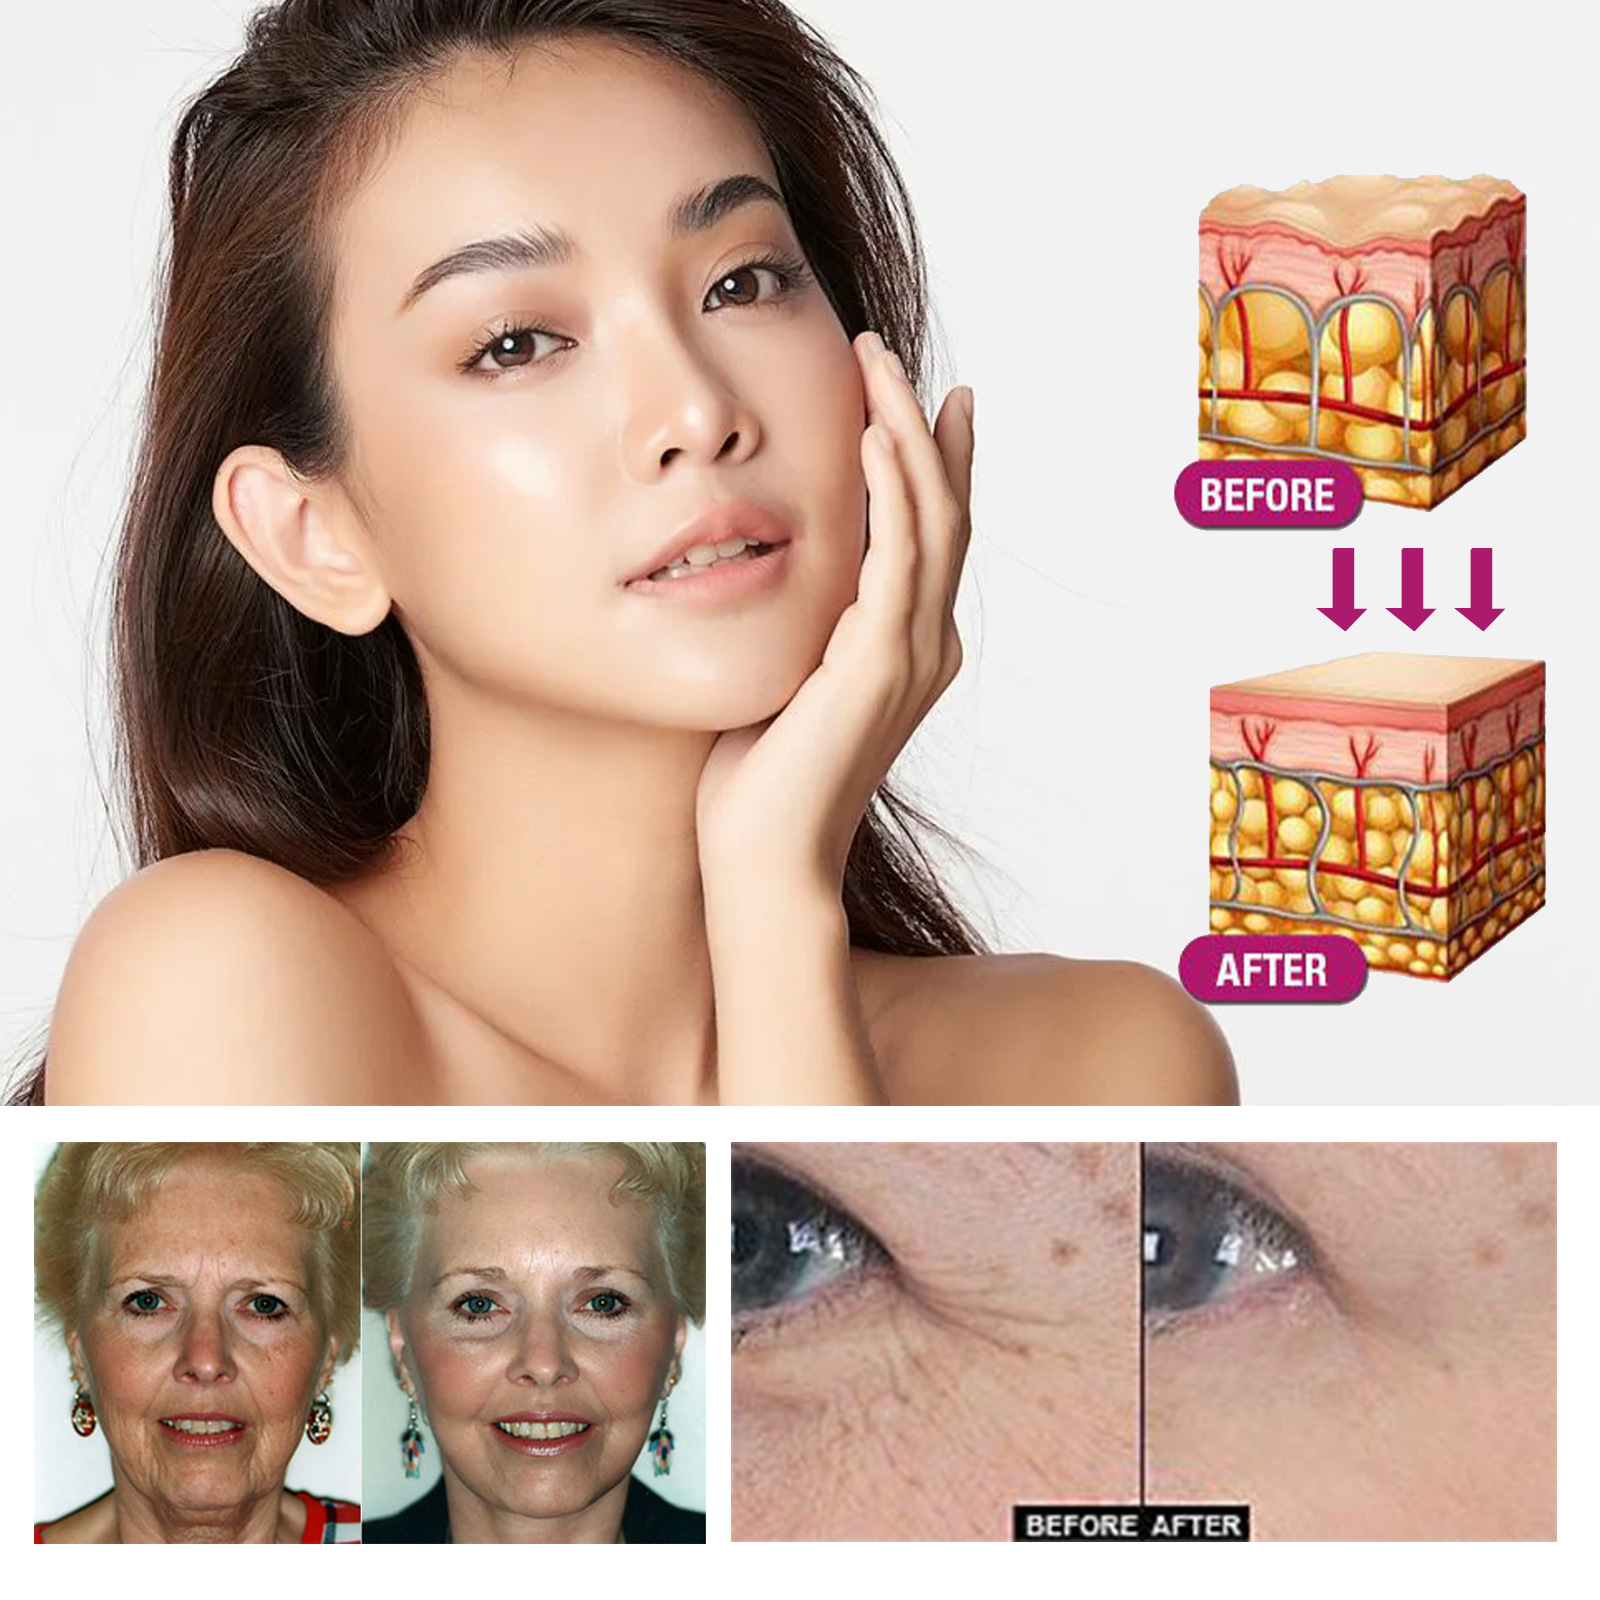 💖Early Mother's Day Sale - 48% OFF BEAUTY COLLAGEN FIRMING MASK